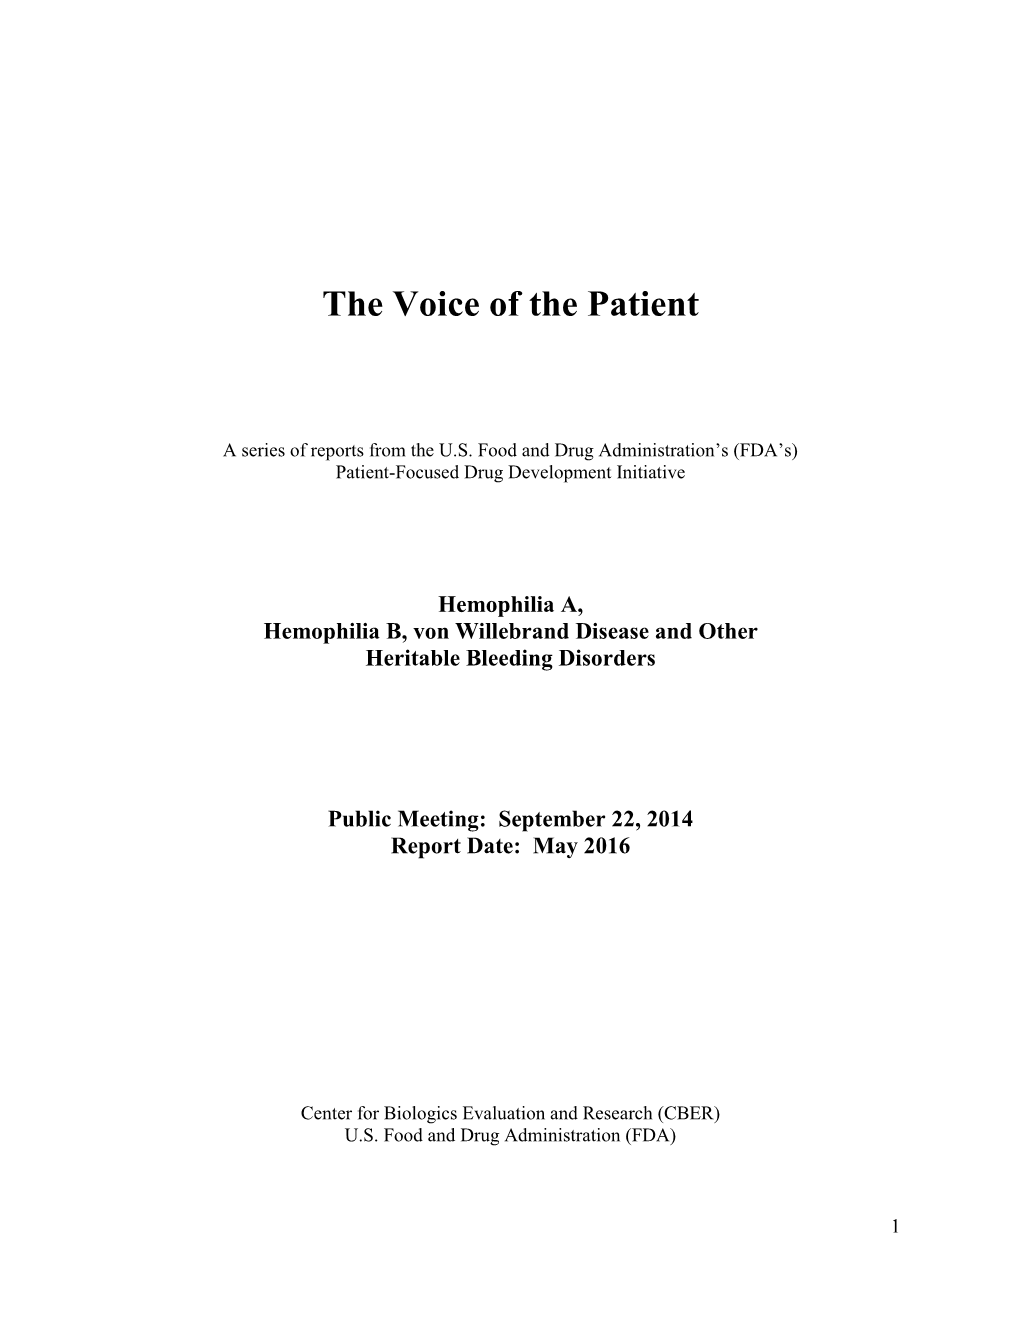 The Voice of the Patient: Hemophilia A, Hemophilia B, Von Willebrand Disease and Other Heritable Bleeding Disorders